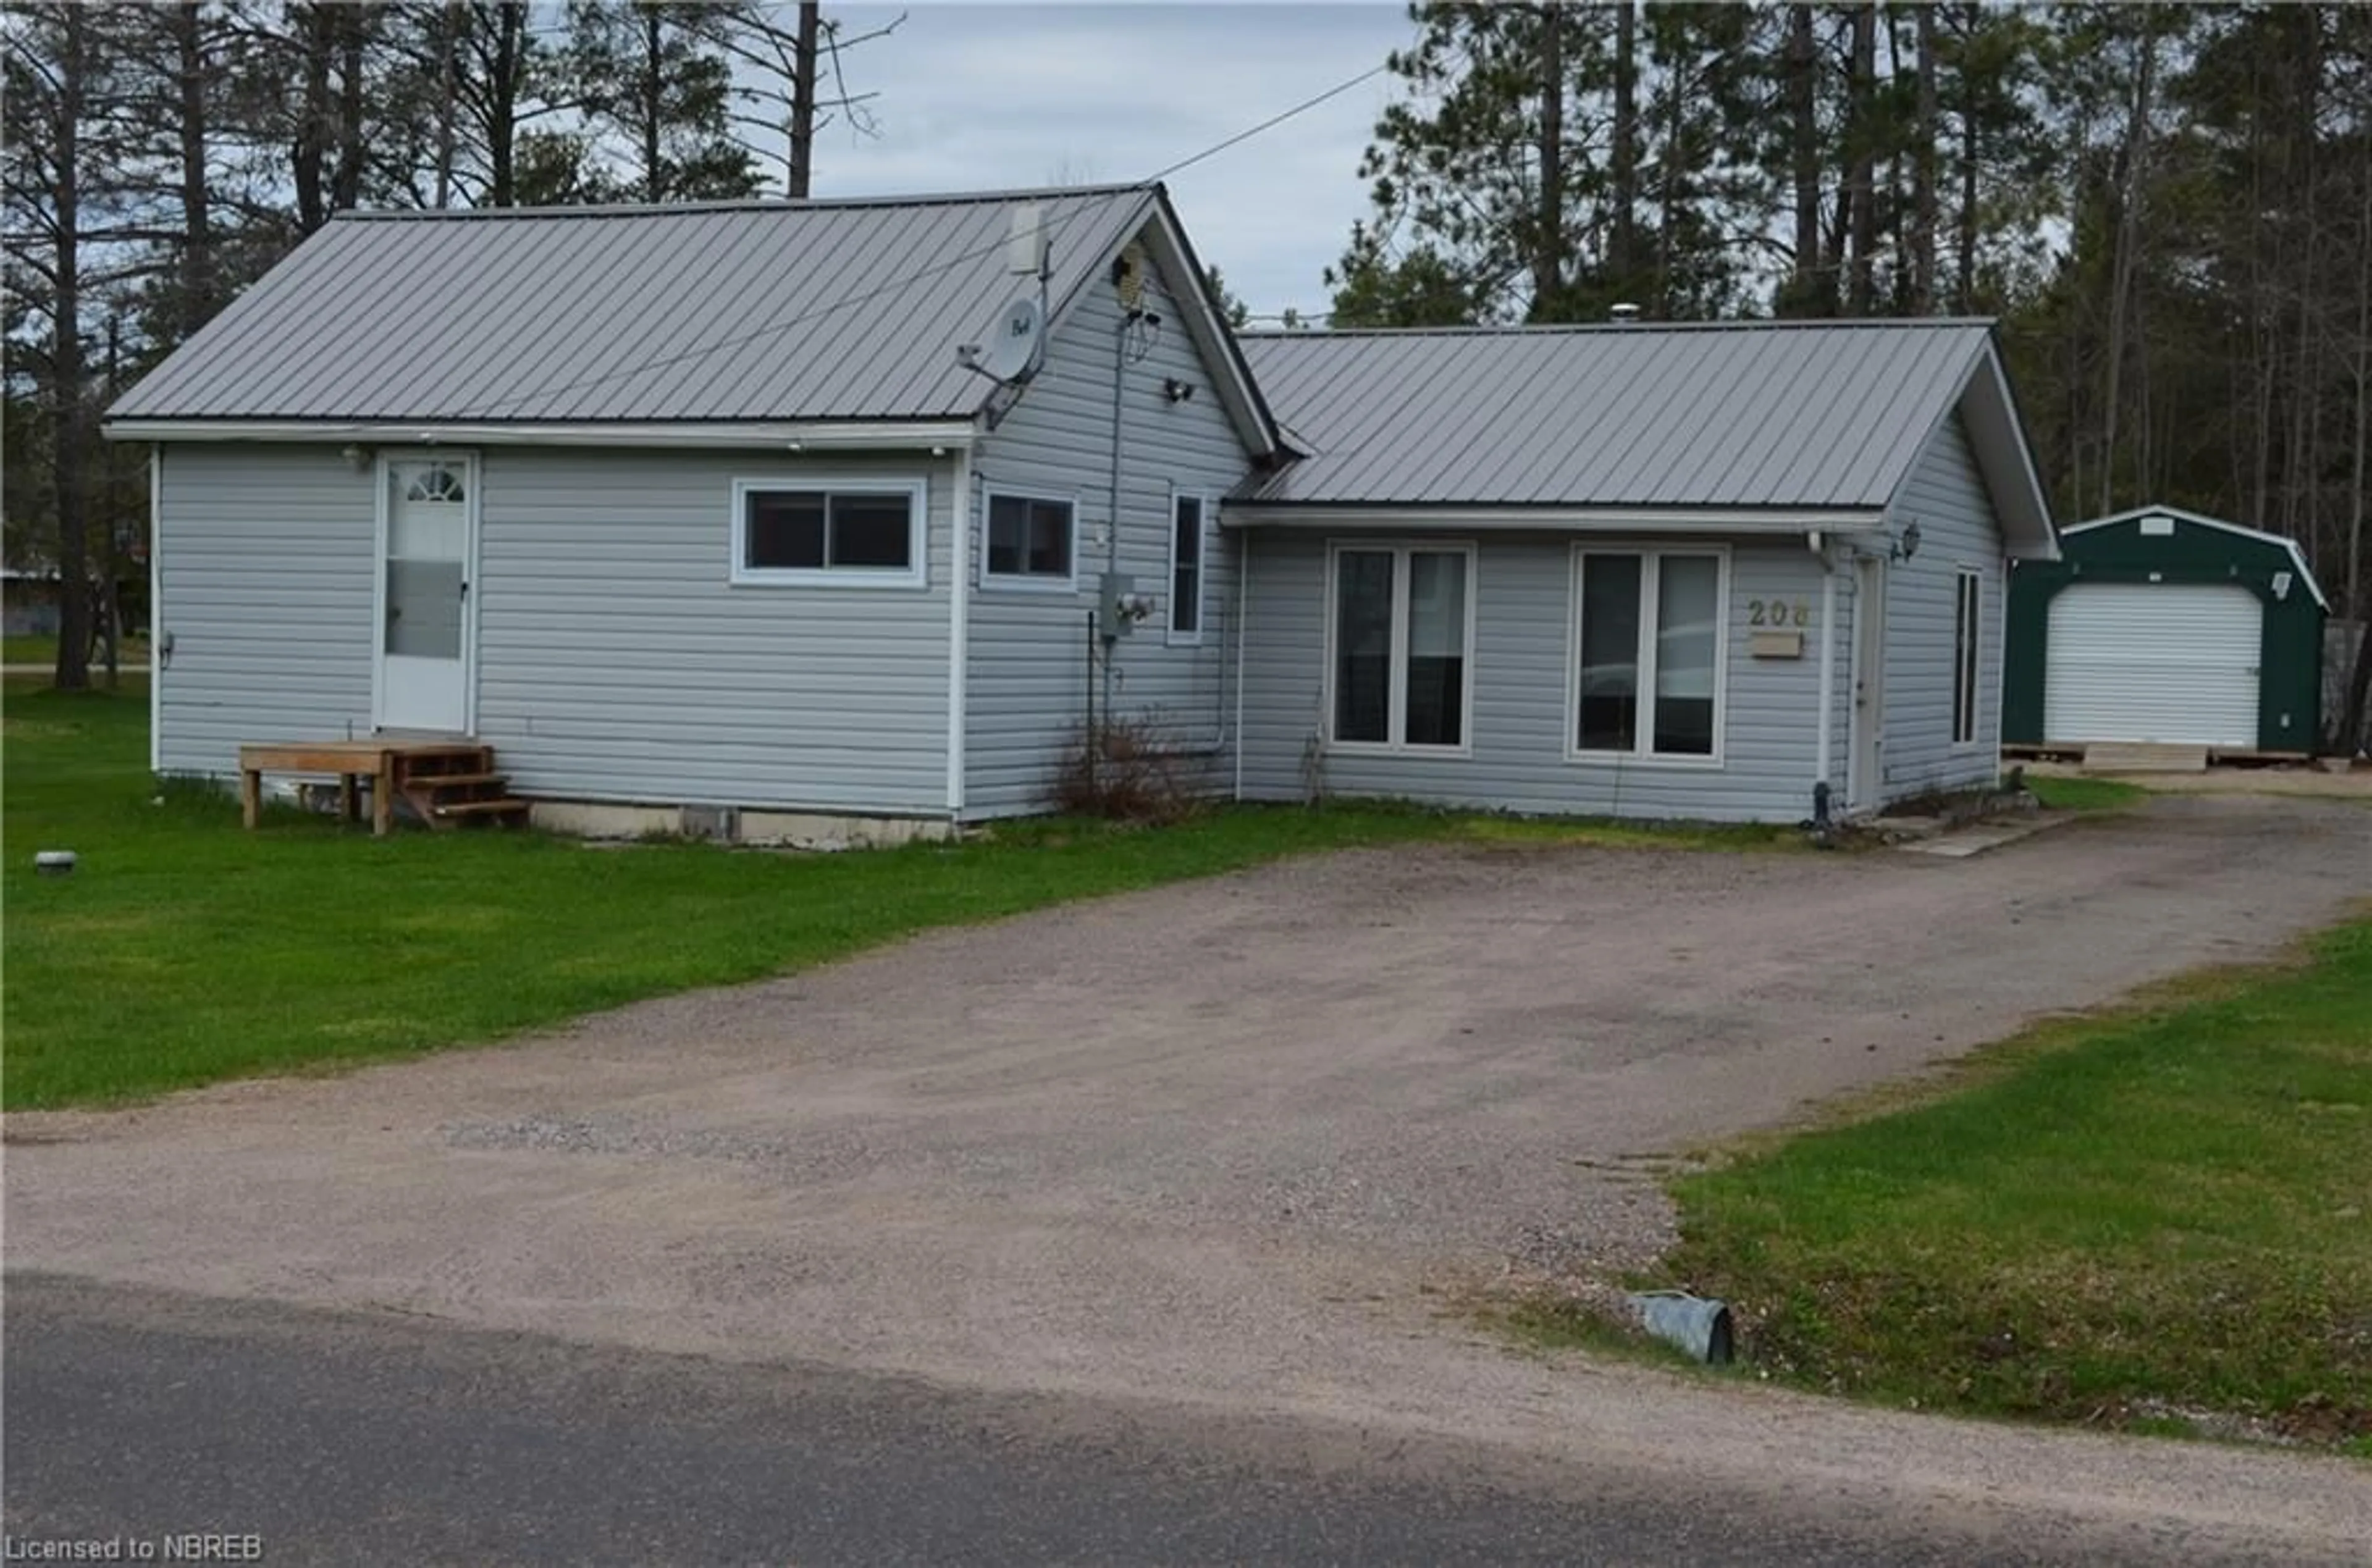 Outside view for 208 Sweezy St, Trout Creek Ontario P0H 2L0